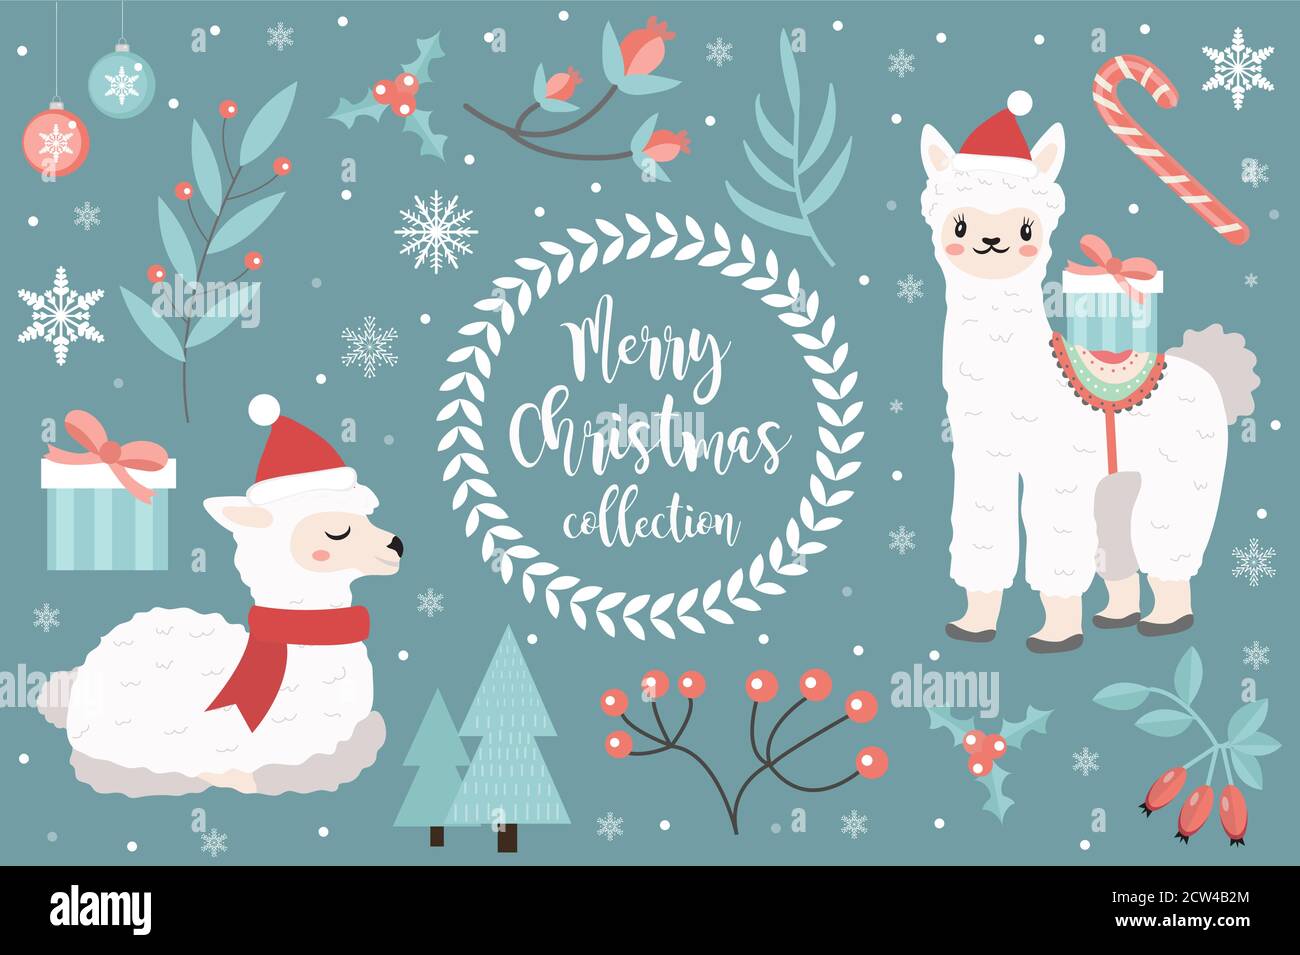 Cute llama in the winter forest set of objects. Collection of design elements with a little alpaca in a hat of Santa Claus, snowflakes and a Christmas Stock Vector